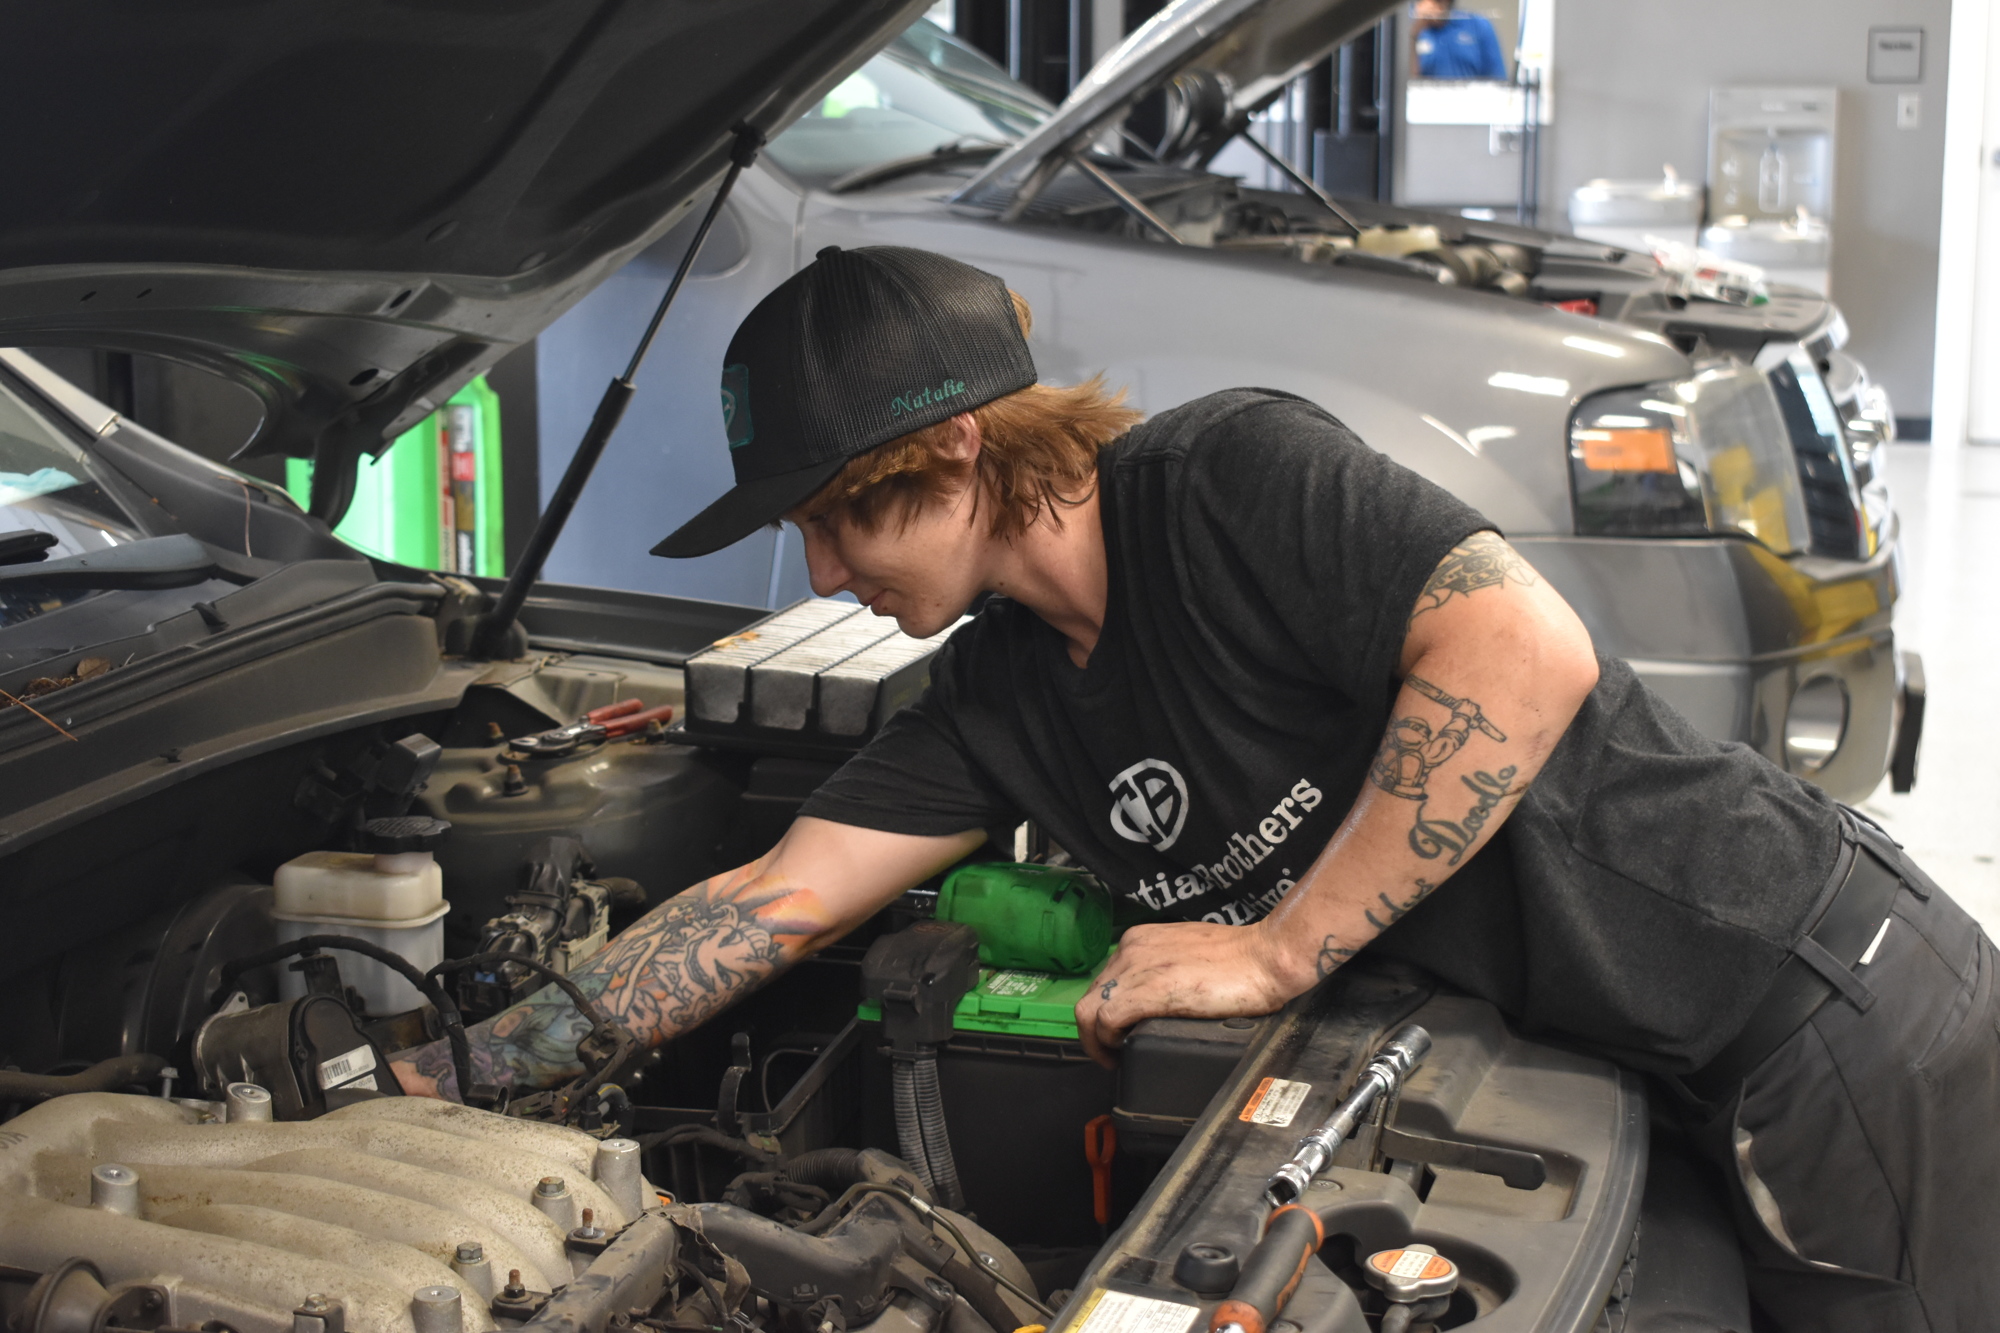 Natalie Turley services a car at Christian Brothers Automotive. (Photo by Ian Swaby)